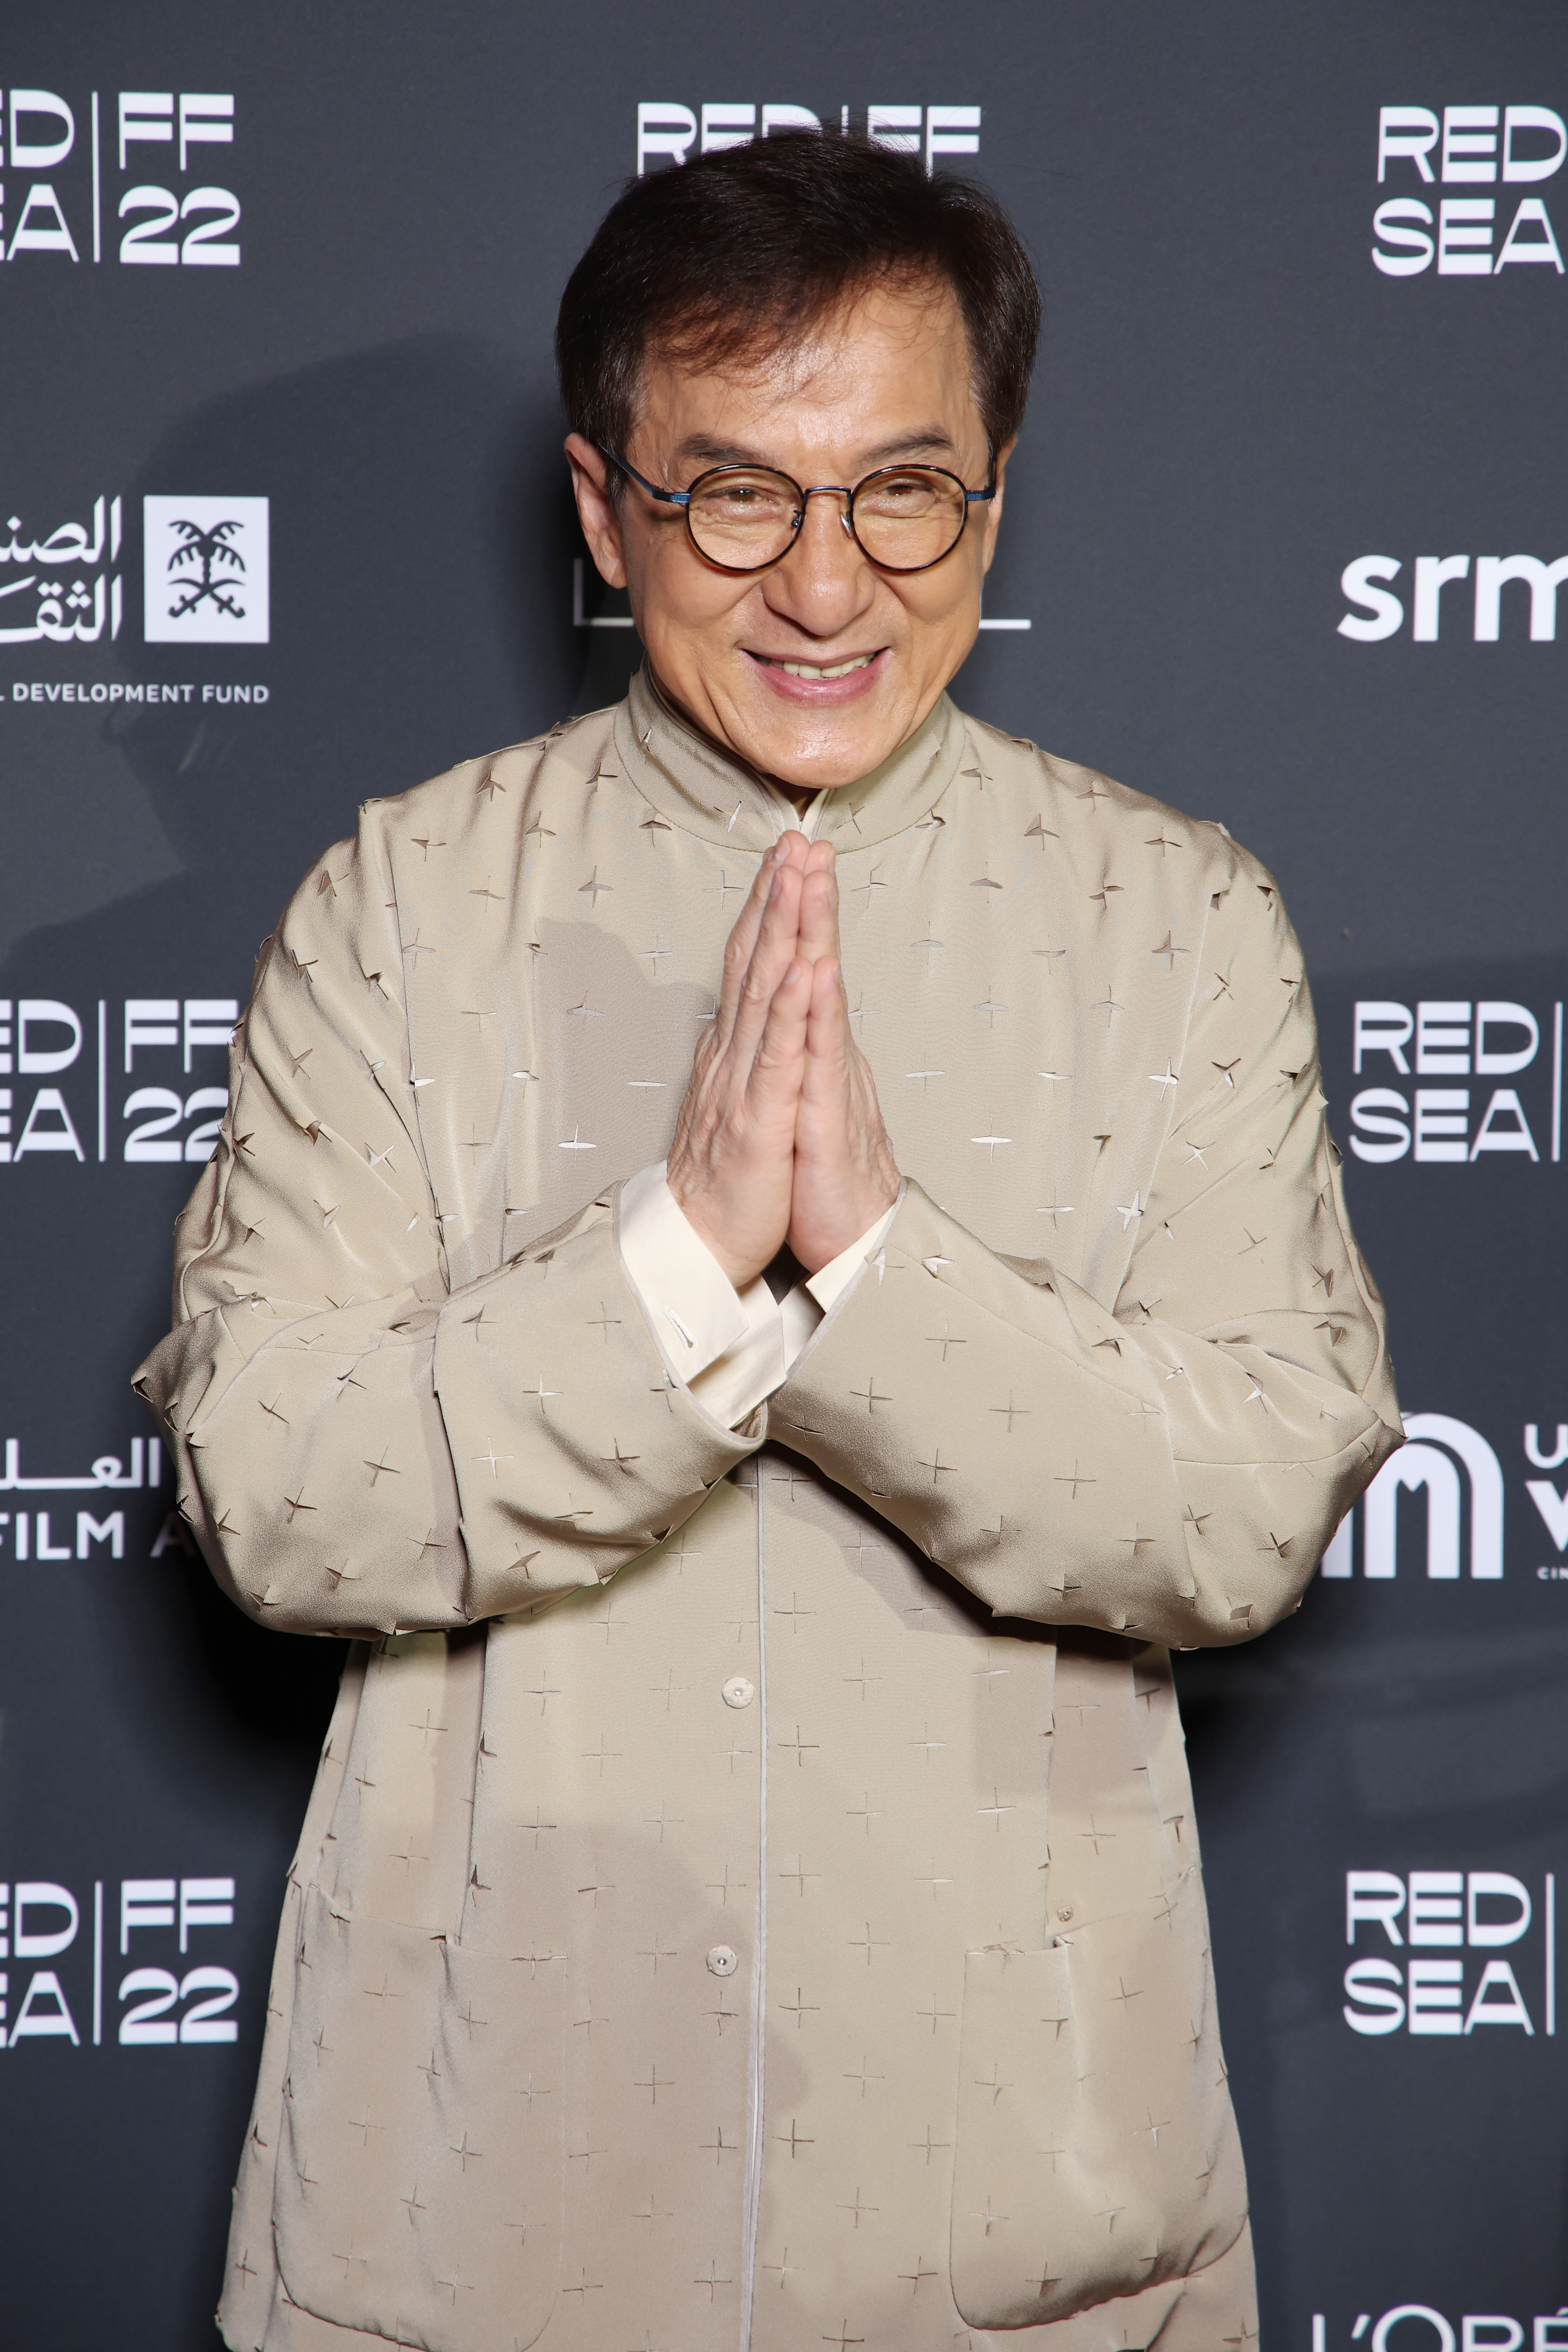 Jackie Chan on the red carpet at the Closing Night Gala Red Carpet at the Red Sea International Film Festival on December 8, 2022 in Jeddah, Saudi Arabia | Source: Getty Images